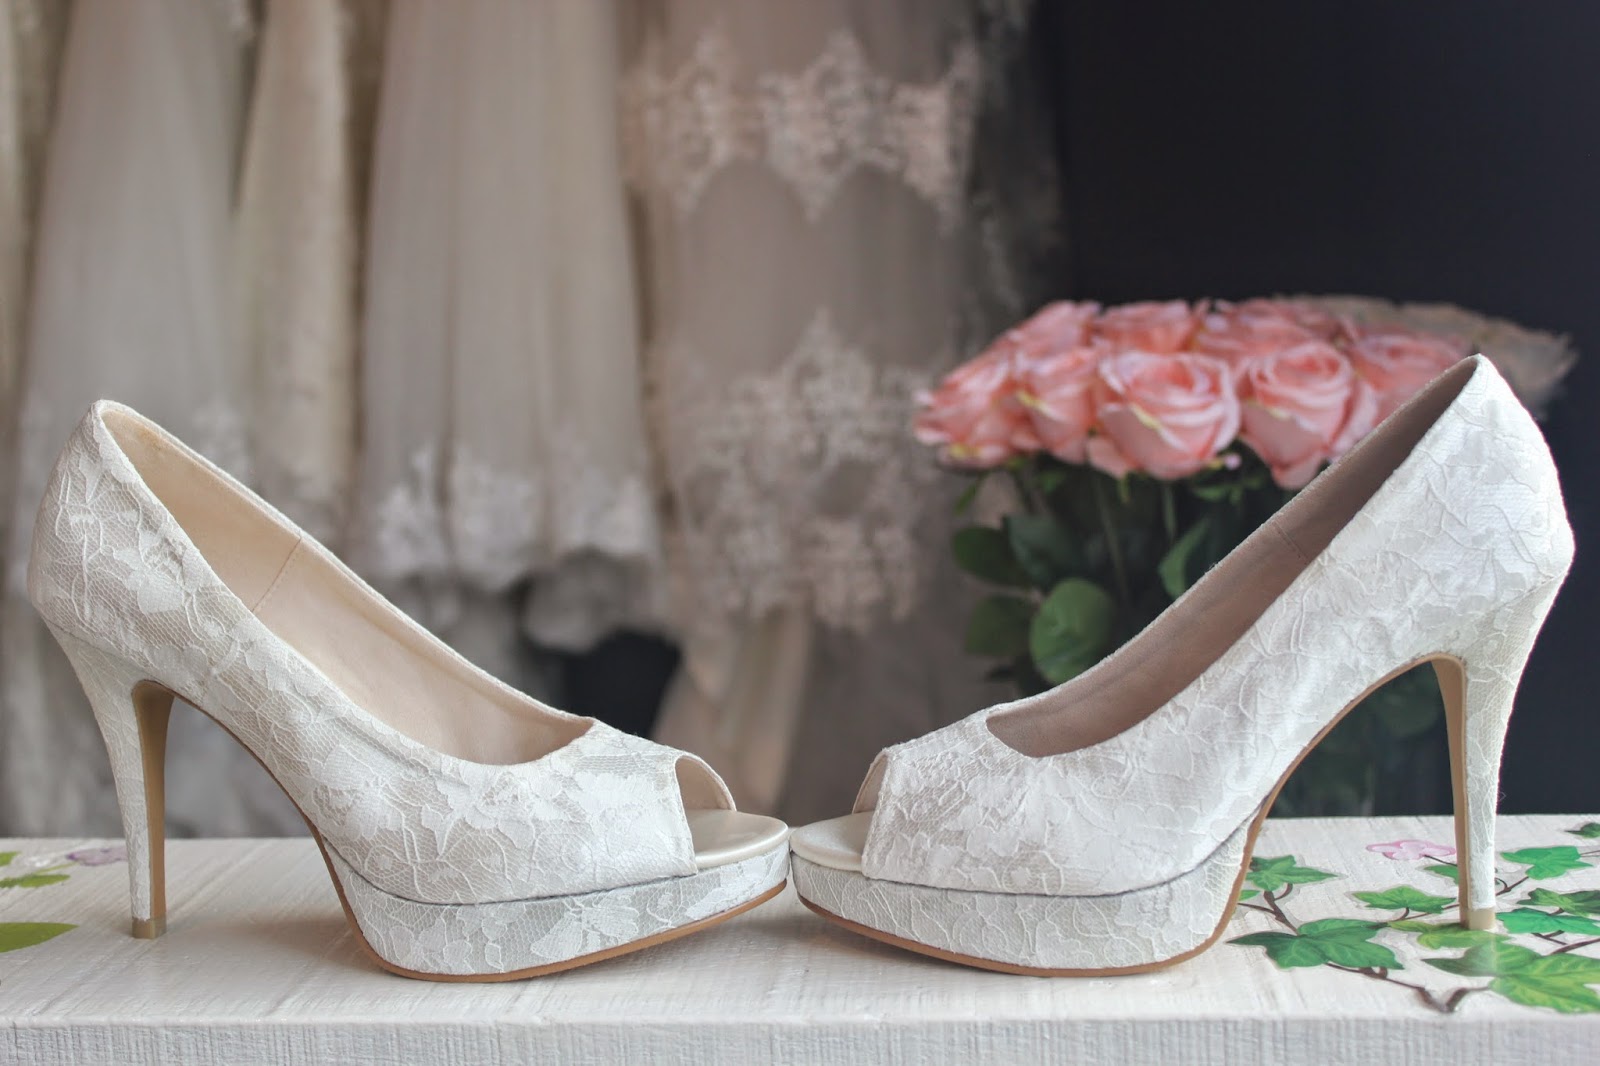 MY BRIDAL GOWN: 4 Inches Off-White Lace Bridal Shoes